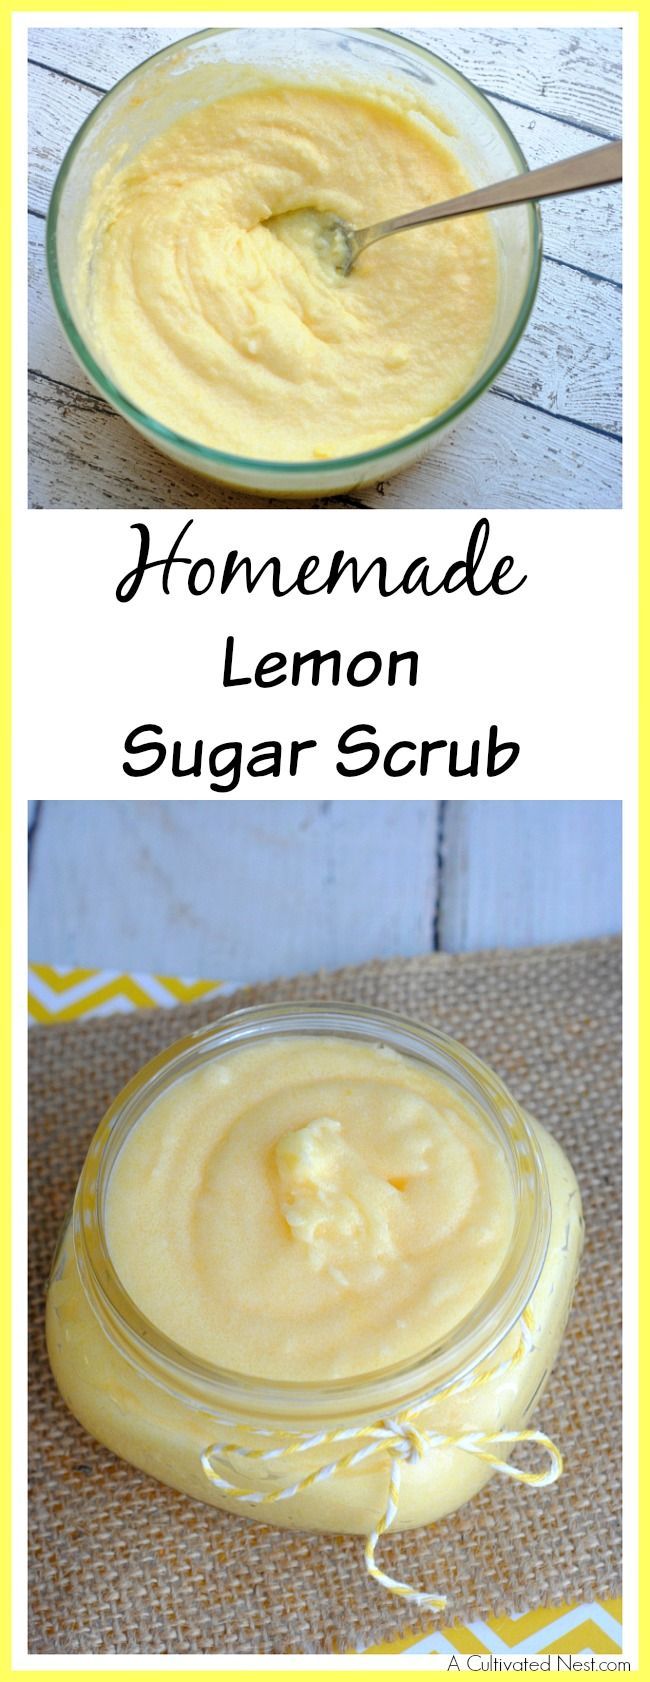 A great way to keep your skin beautiful and healthy is to use a body scrub! This moisturizing homemade lemon sugar scrub will